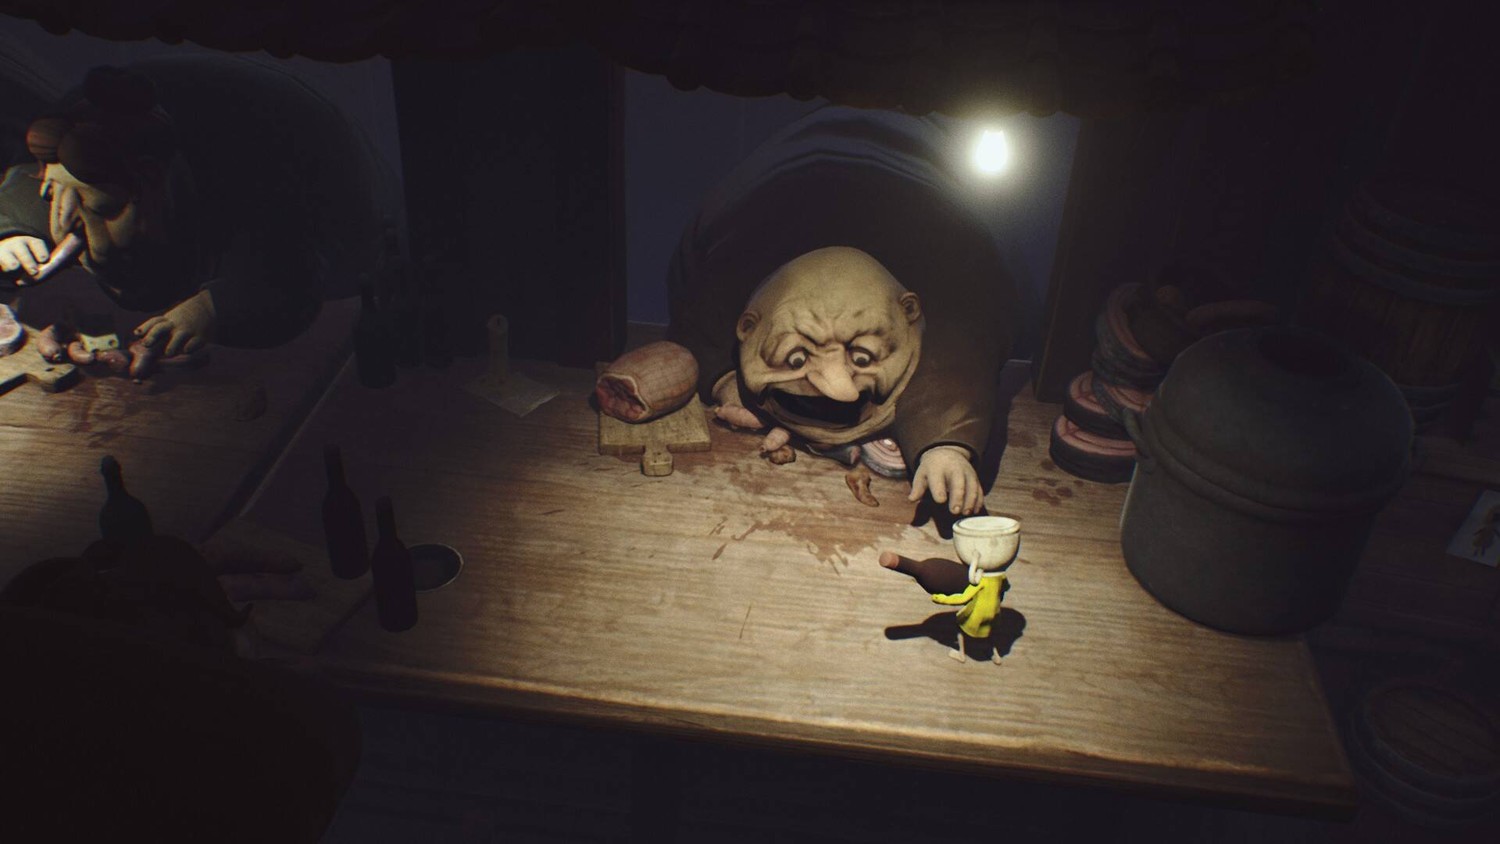 Little Nightmares (Complete) v1.0.43.1 DRM-Free Download - Free GOG PC Games